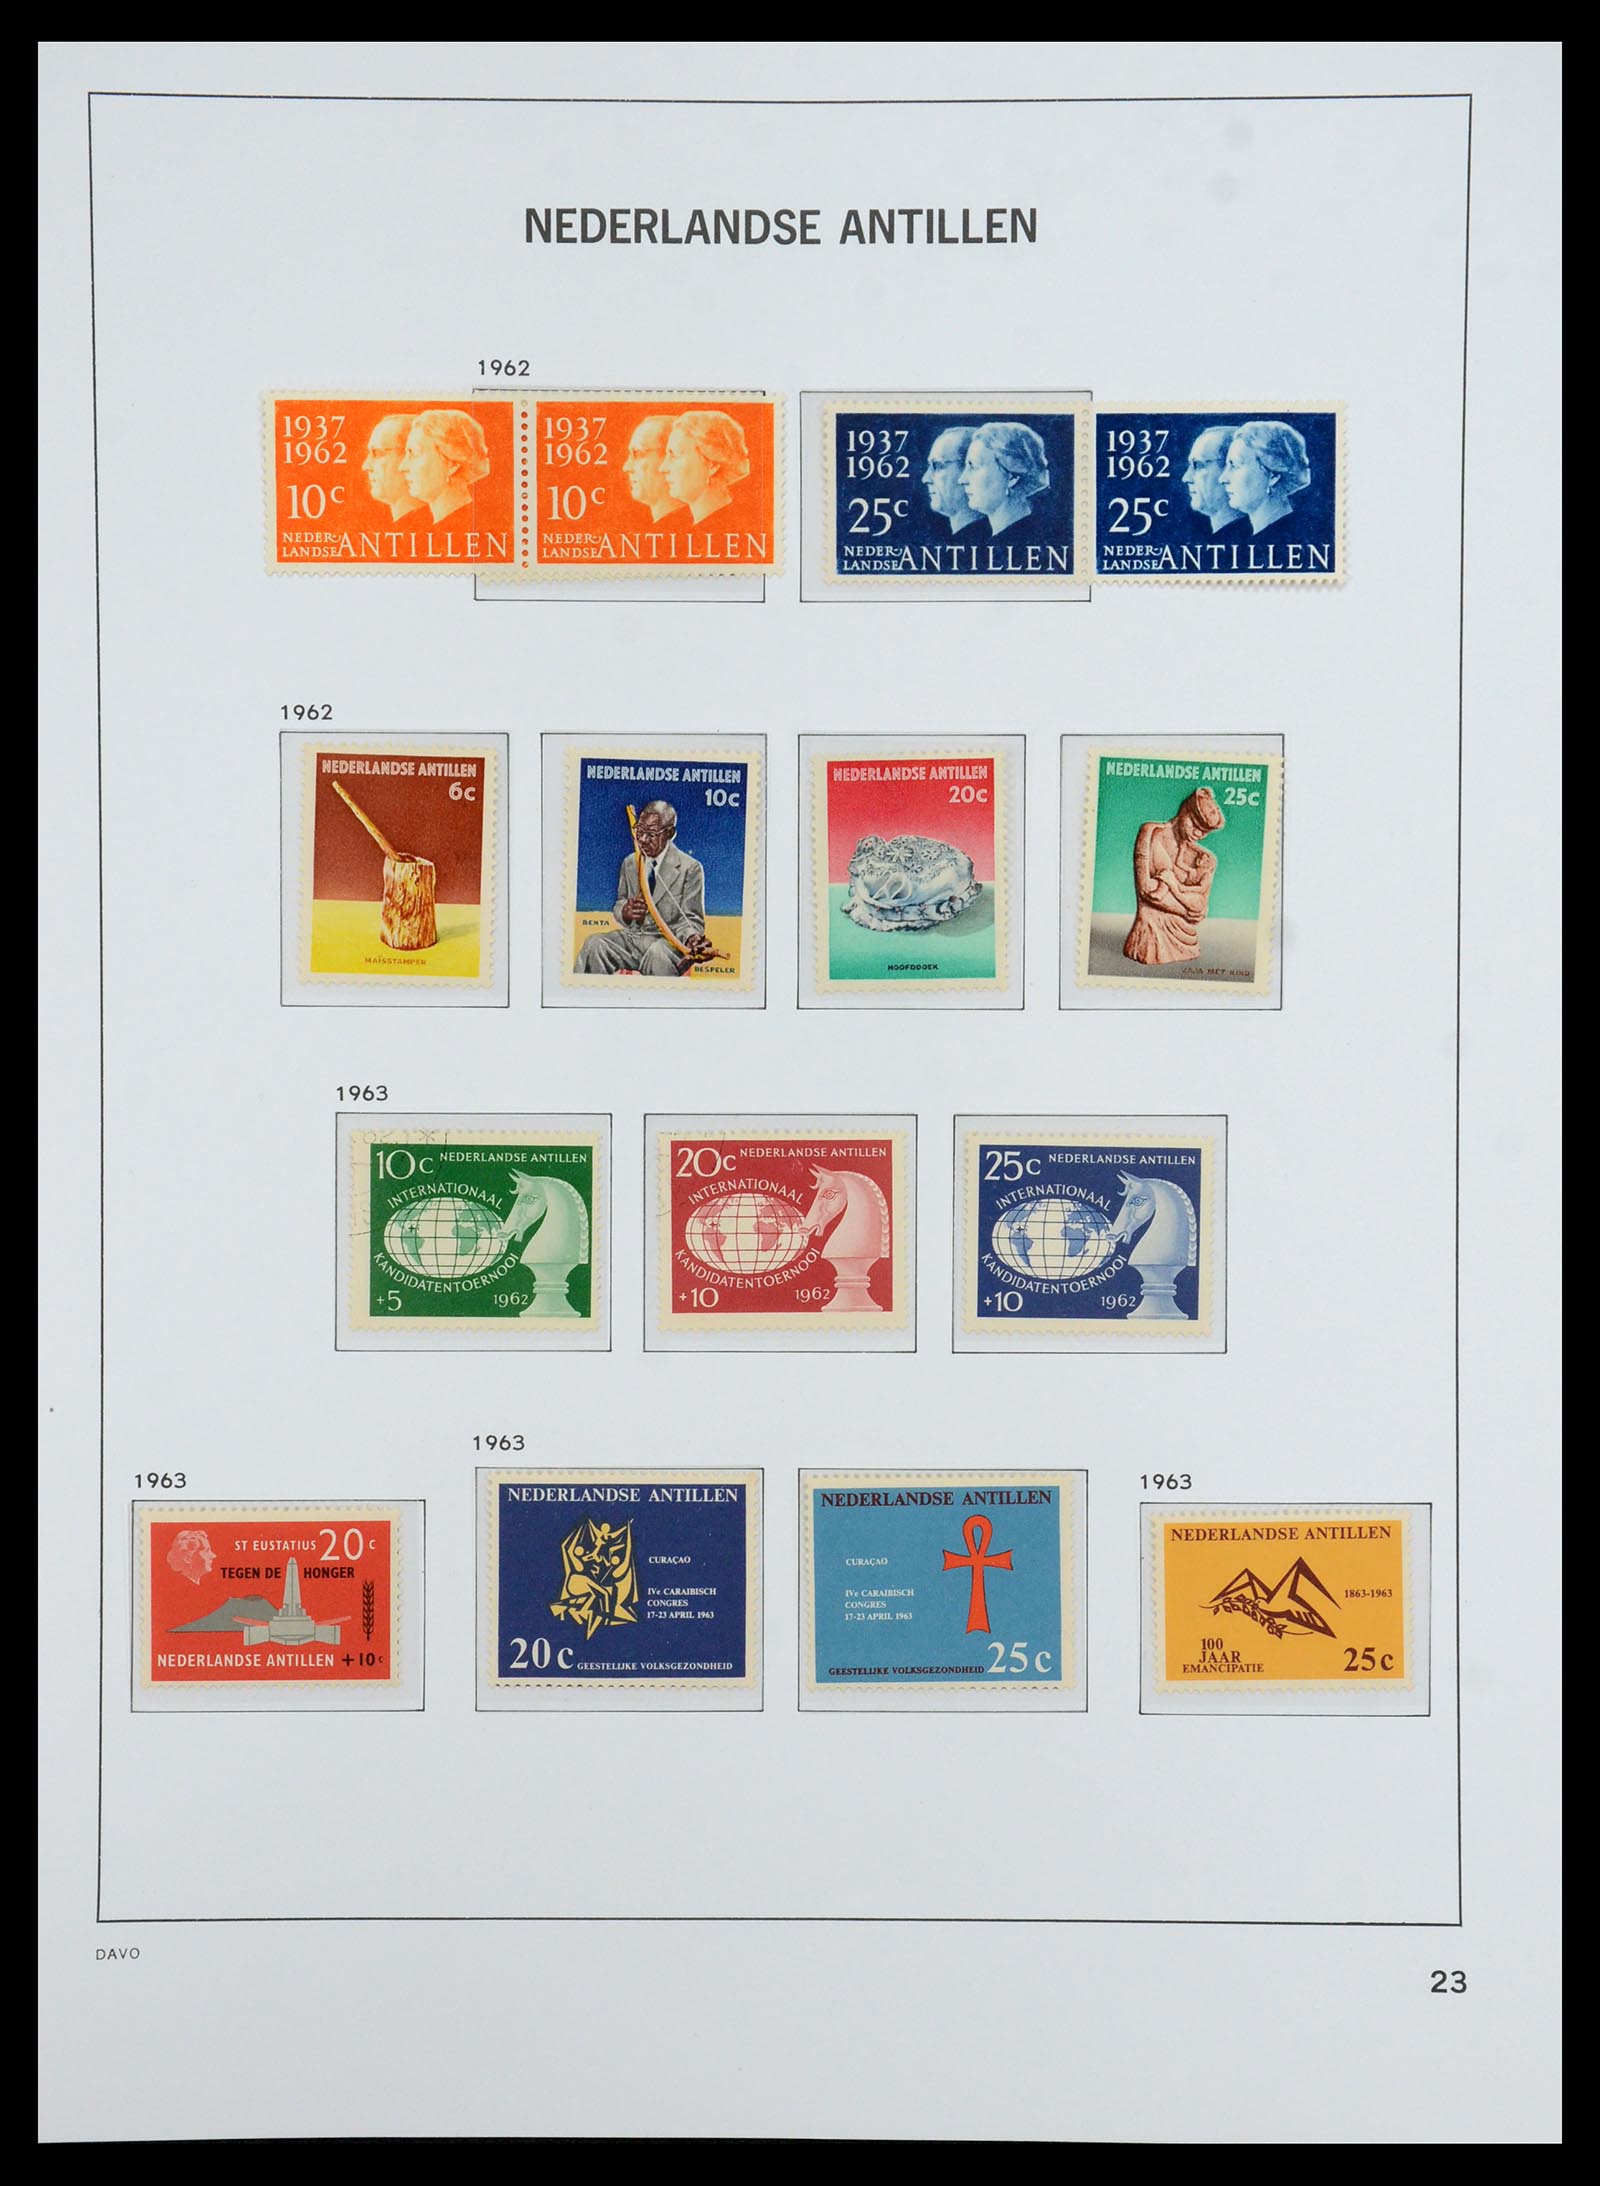 36398 071 - Stamp collection 36398 Dutch territories 1864-1975.